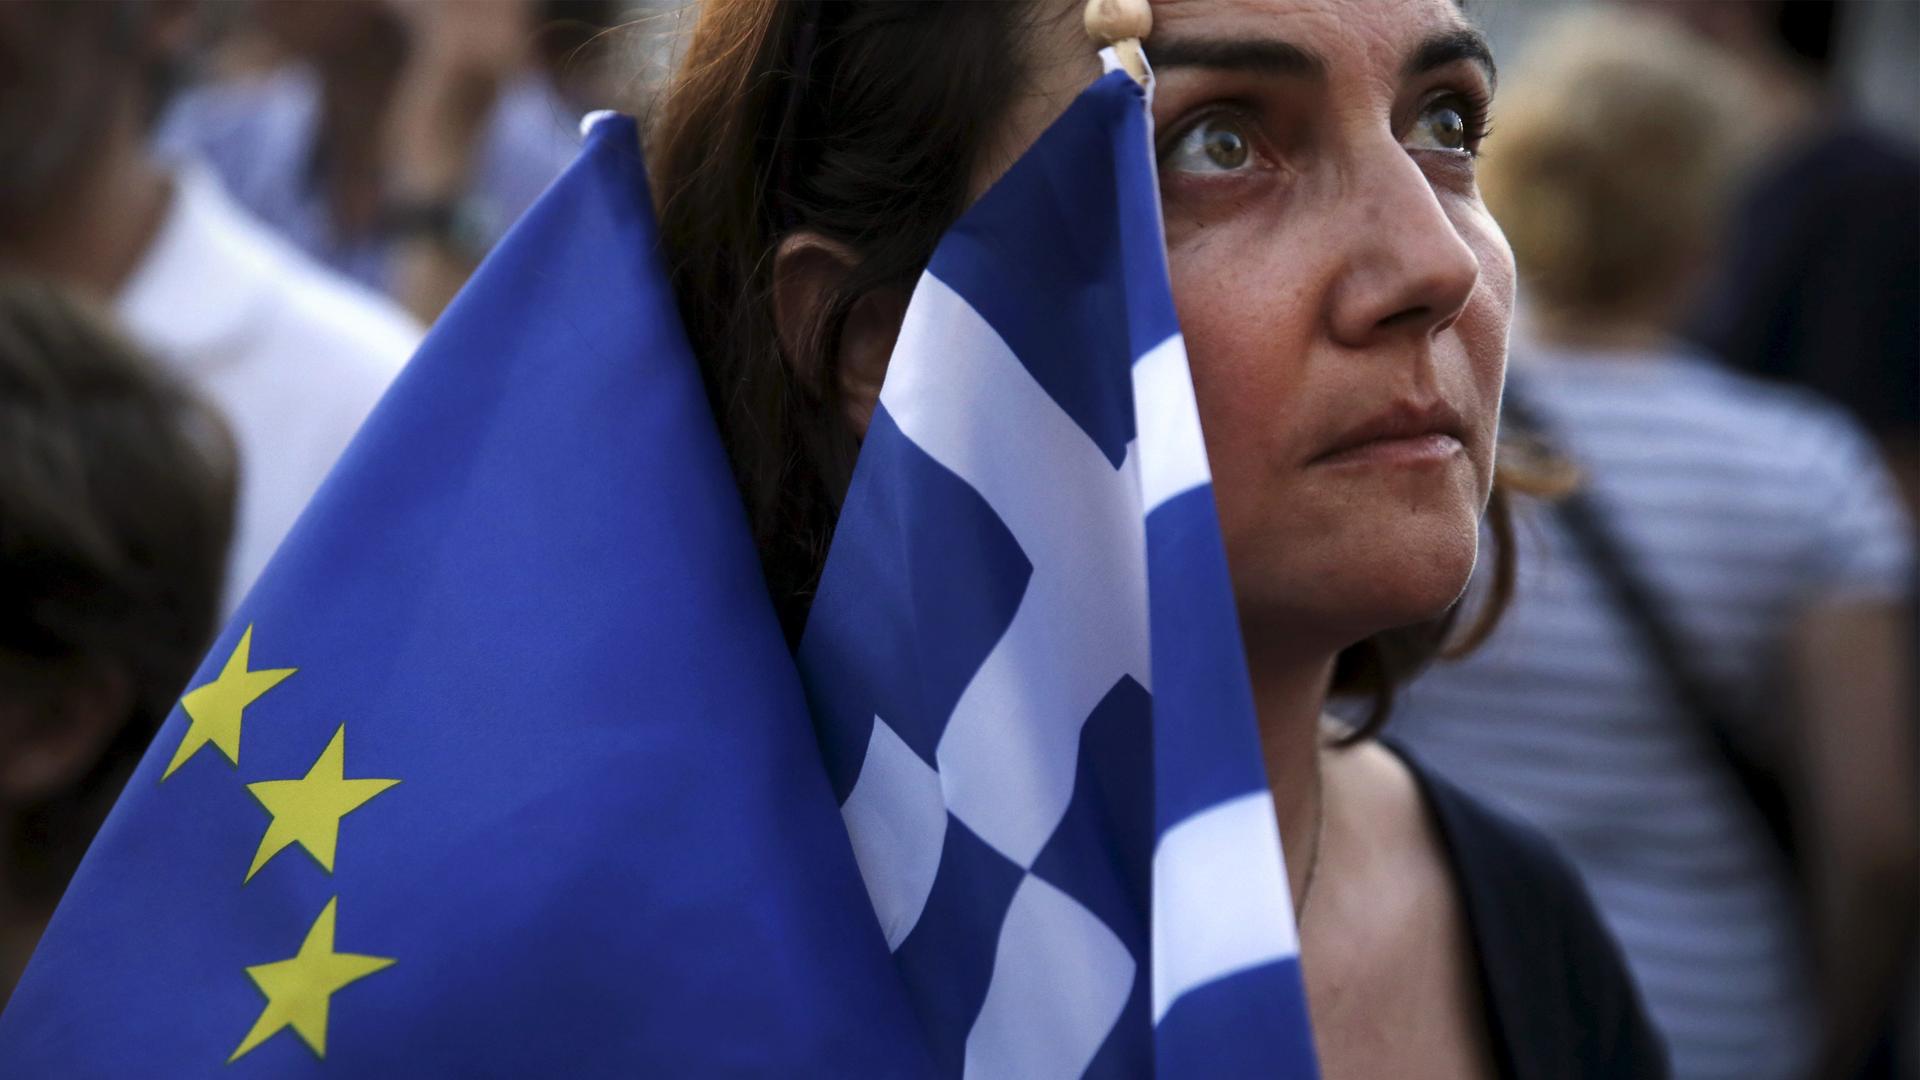 A pro-Euro protester holds a European Union and a Greek national flag during a rally in front of the parliament building in Athens, Greece, July 9, 2015.